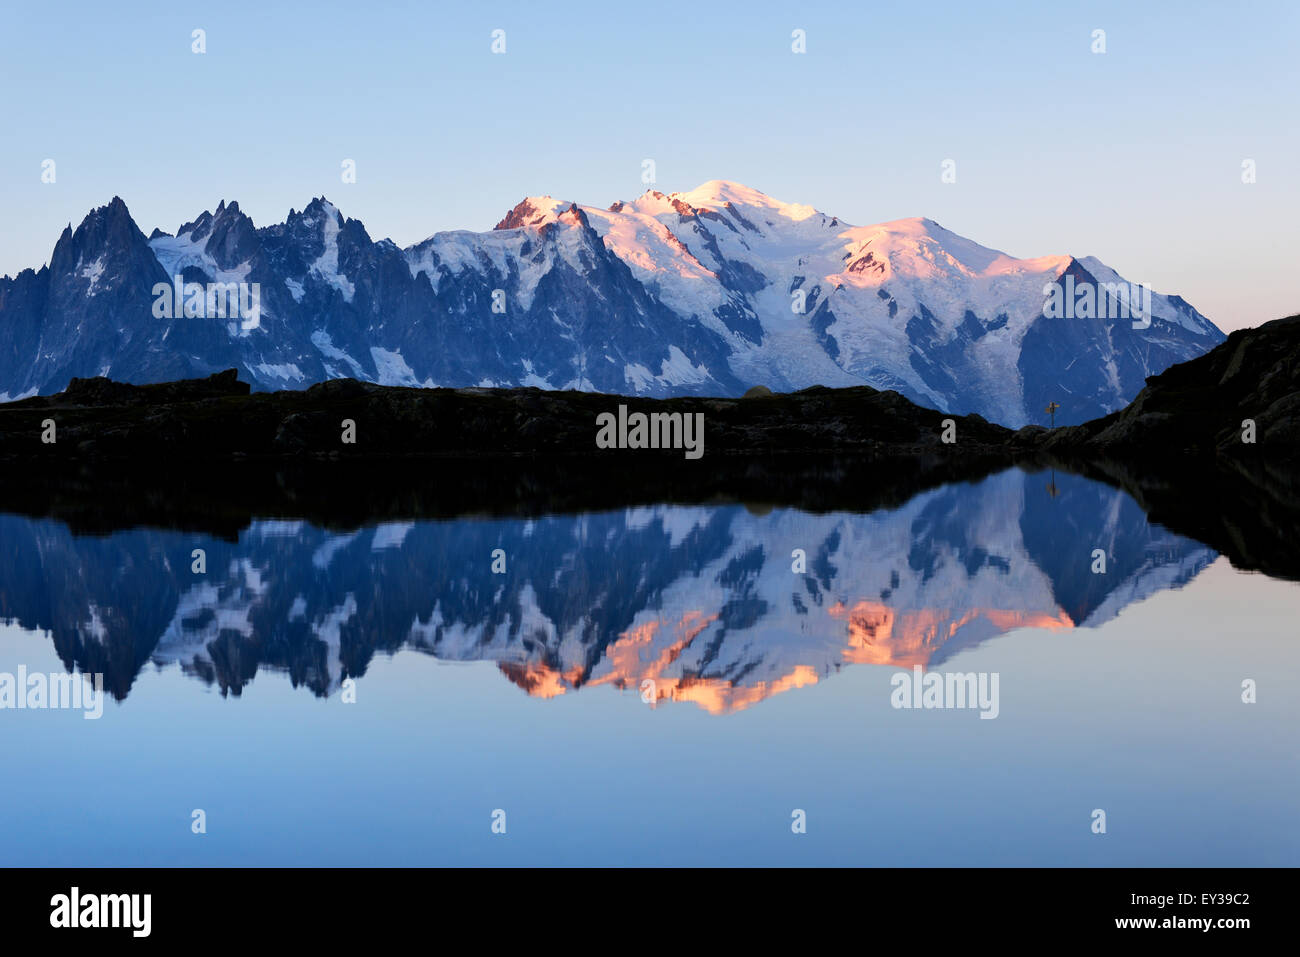 Mont Blanc massif at sunrise reflected in Lac de Chésserys, Montblanc on the right, Chamonix, France Stock Photo